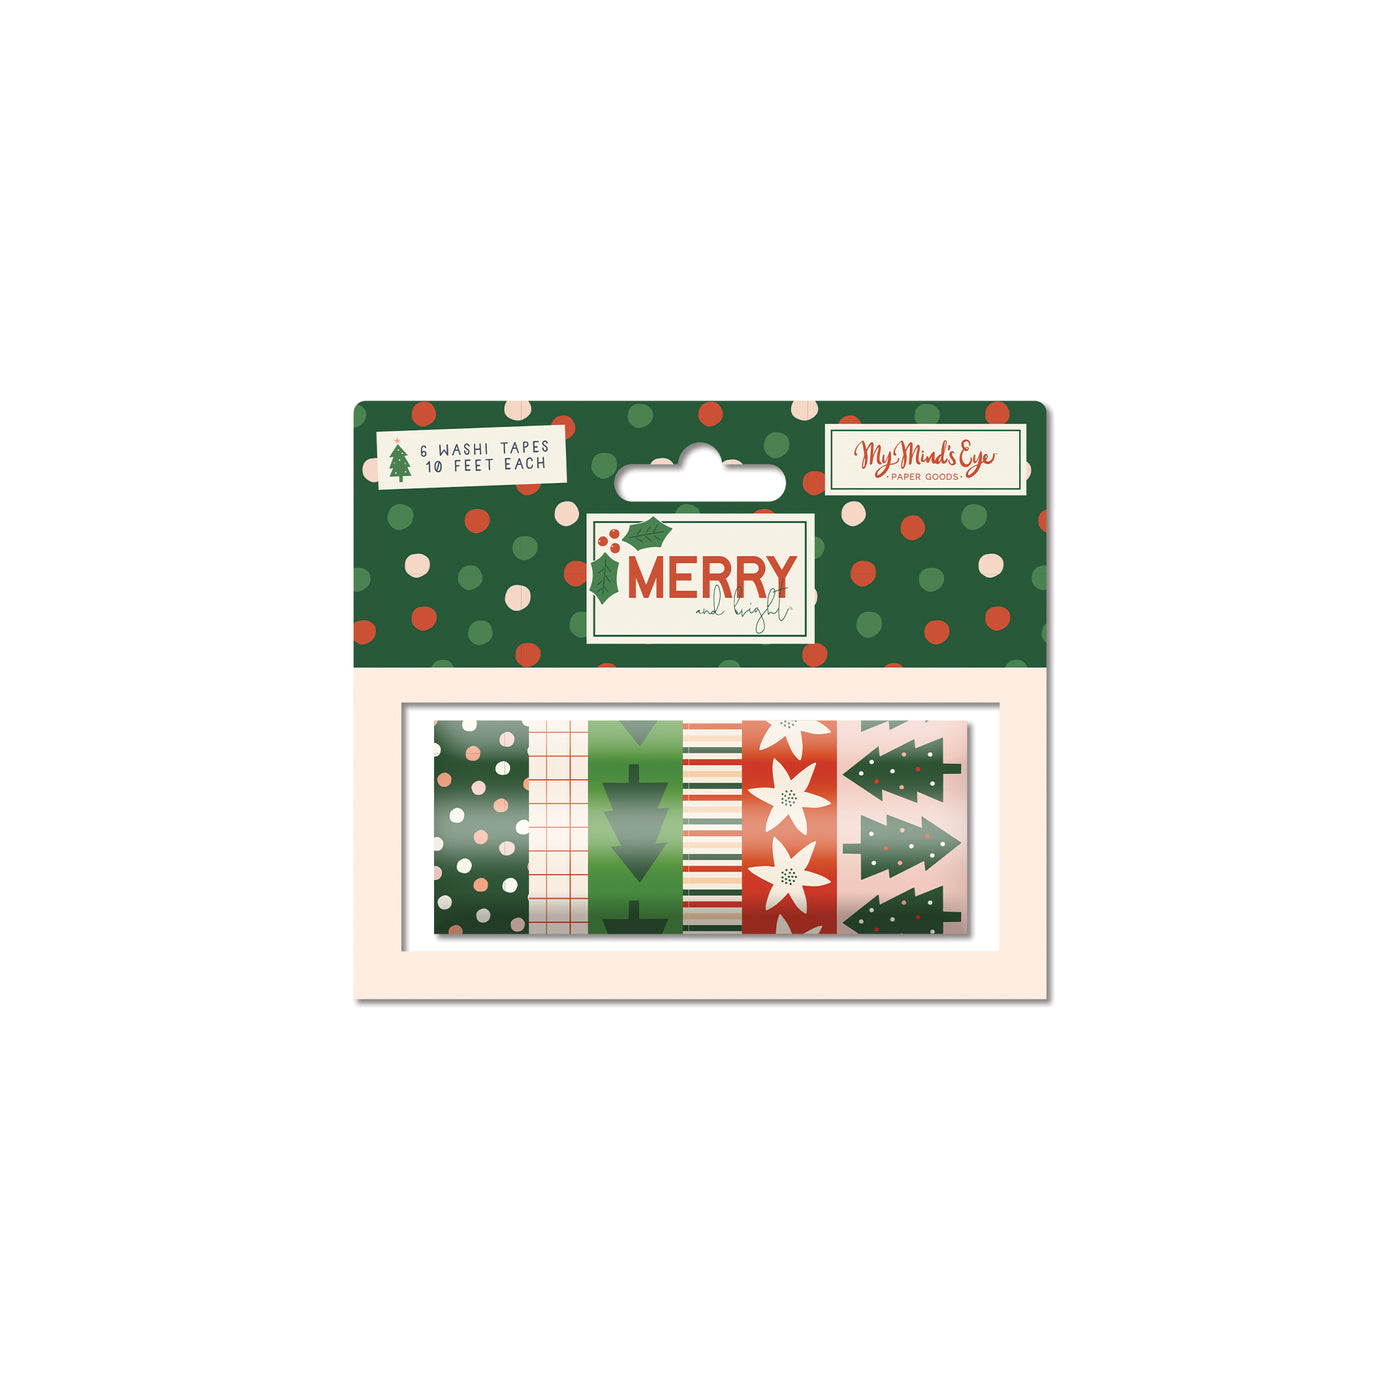 MAB119 - Merry and Bright Washi Tape